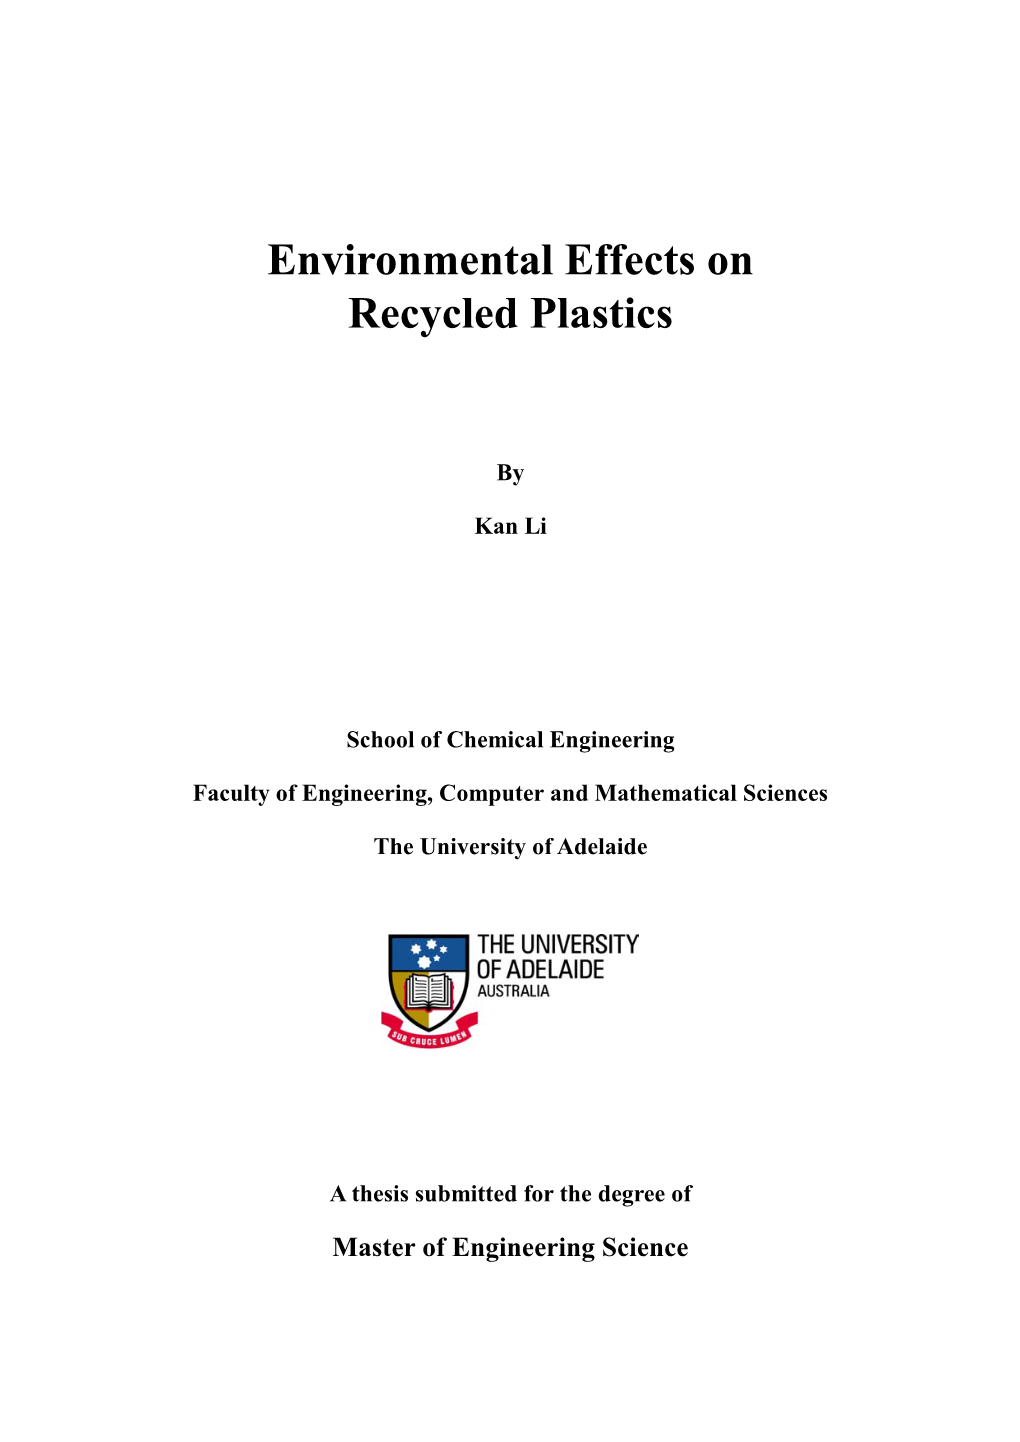 Environmental Effects on the Recycled Plastic Composites